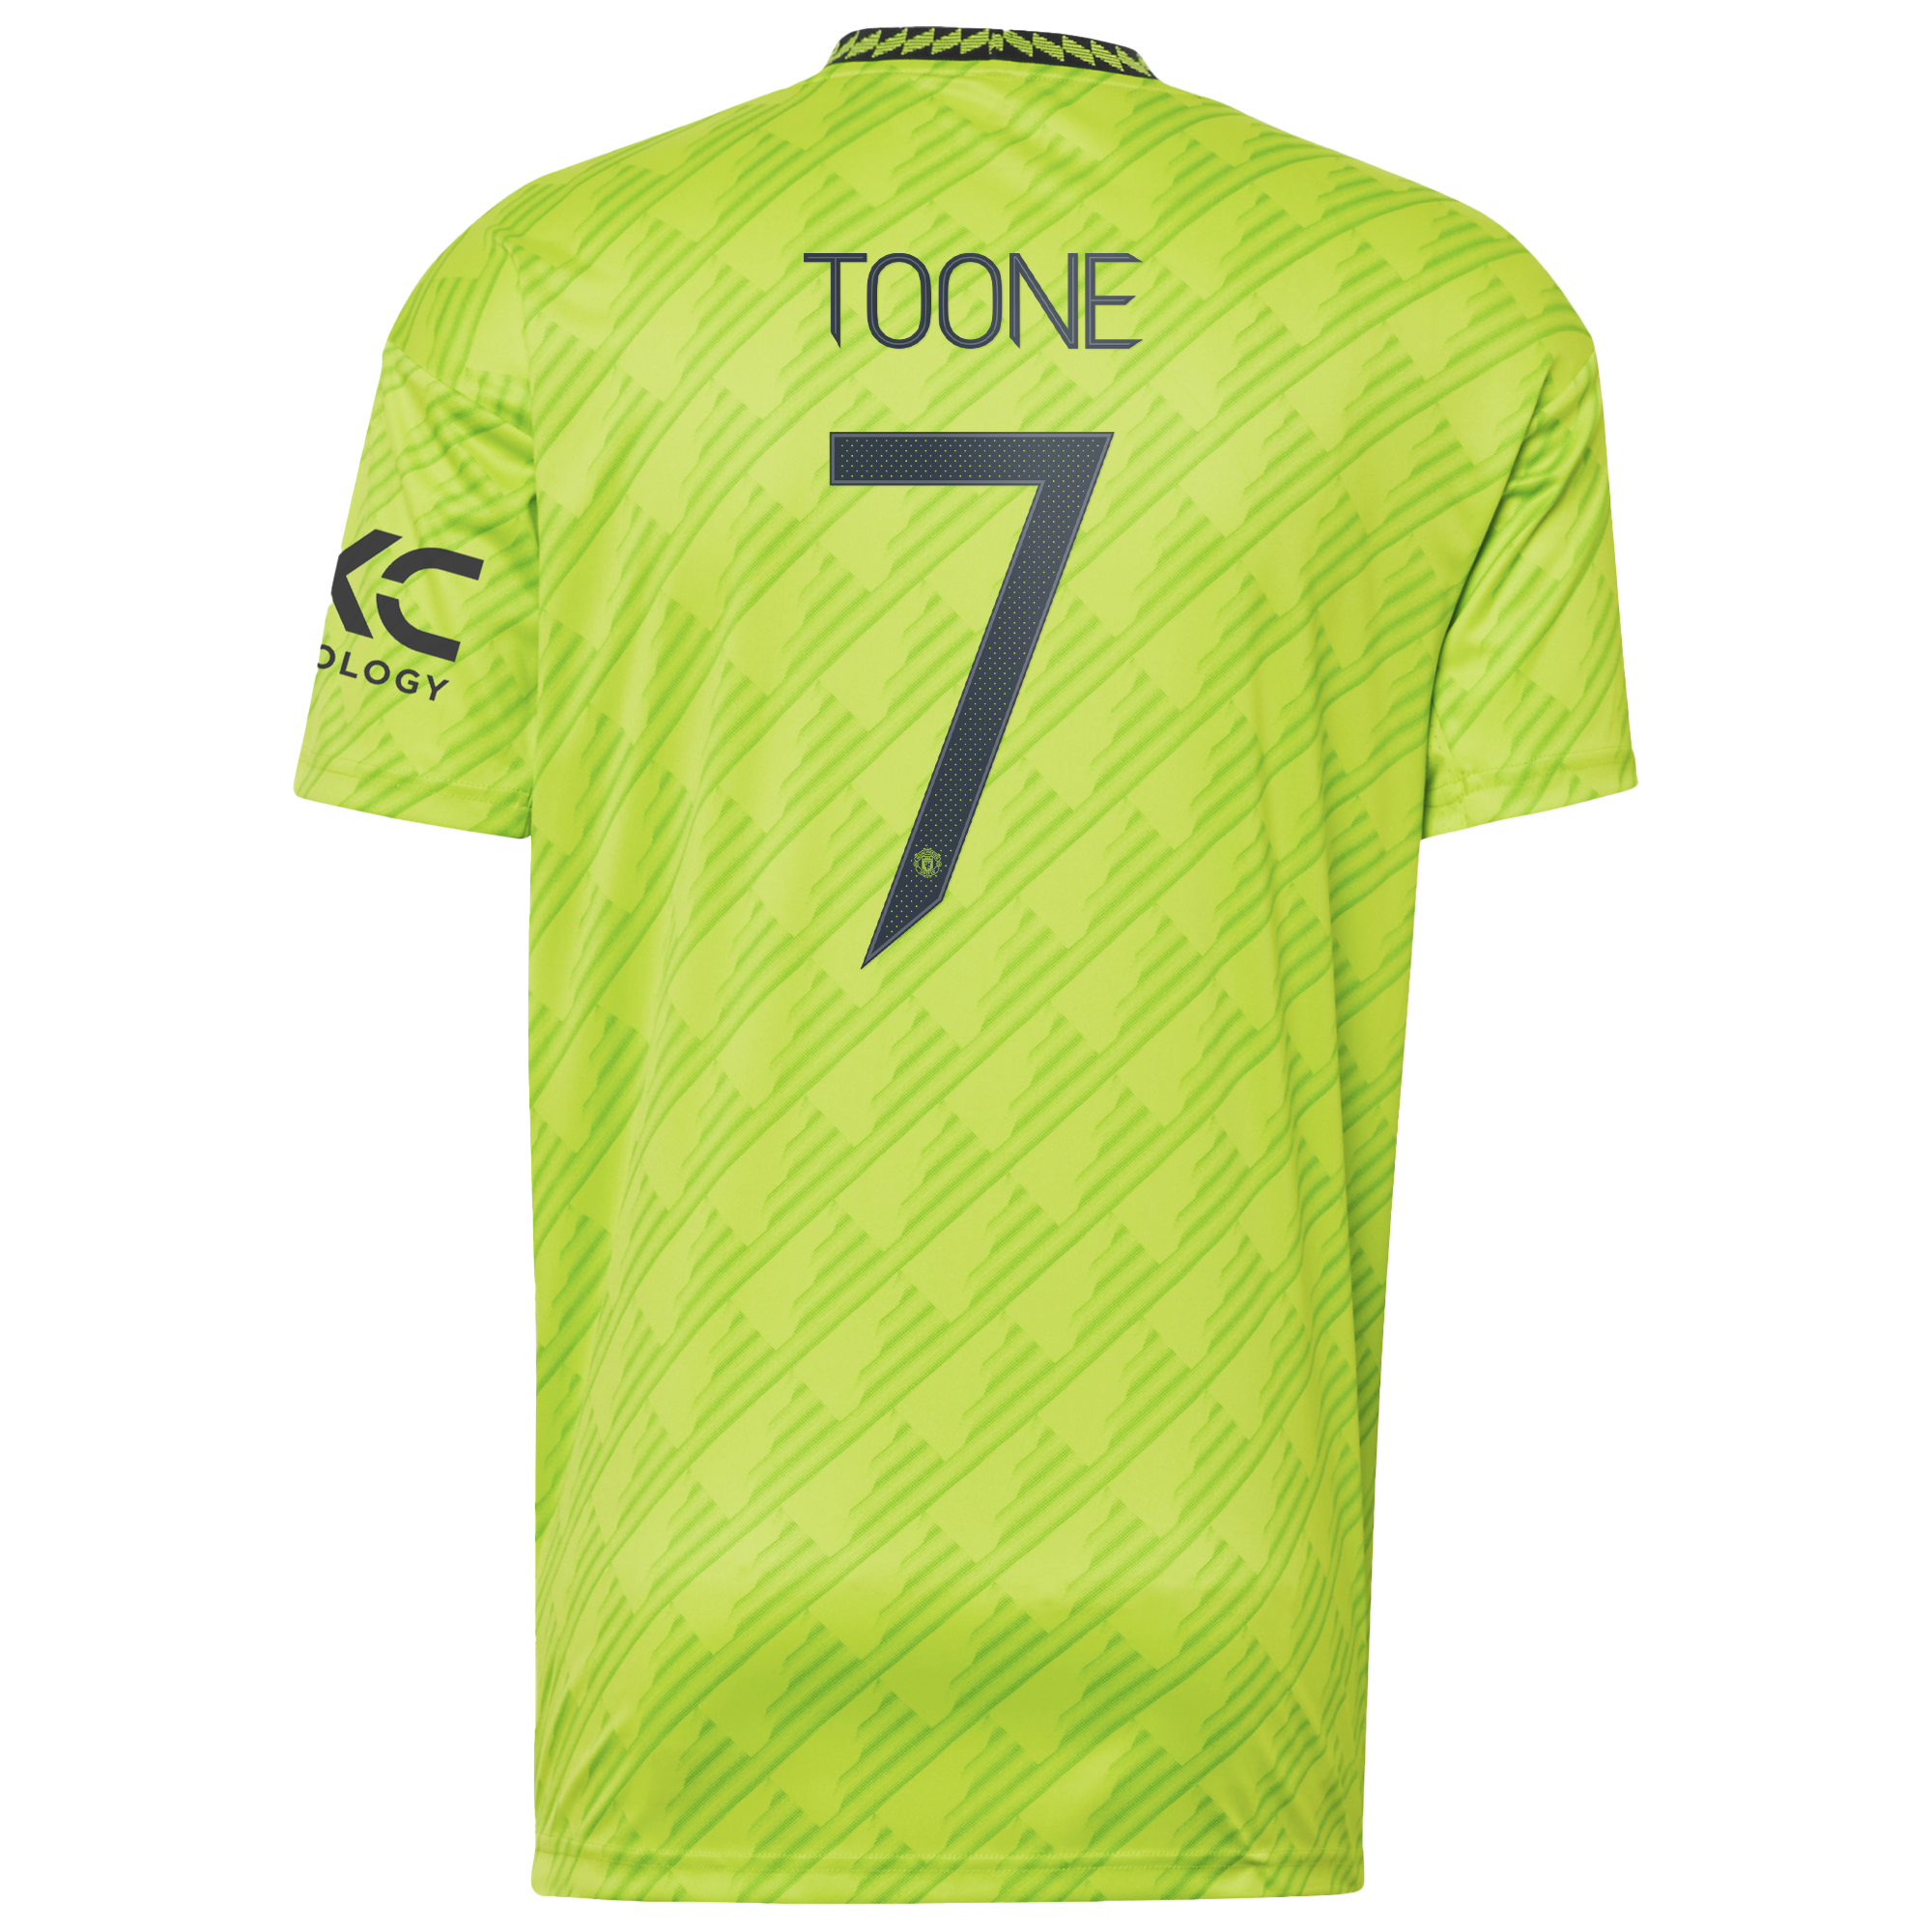 Manchester United Cup Third Shirt 2022-23 with Toone 7 printing